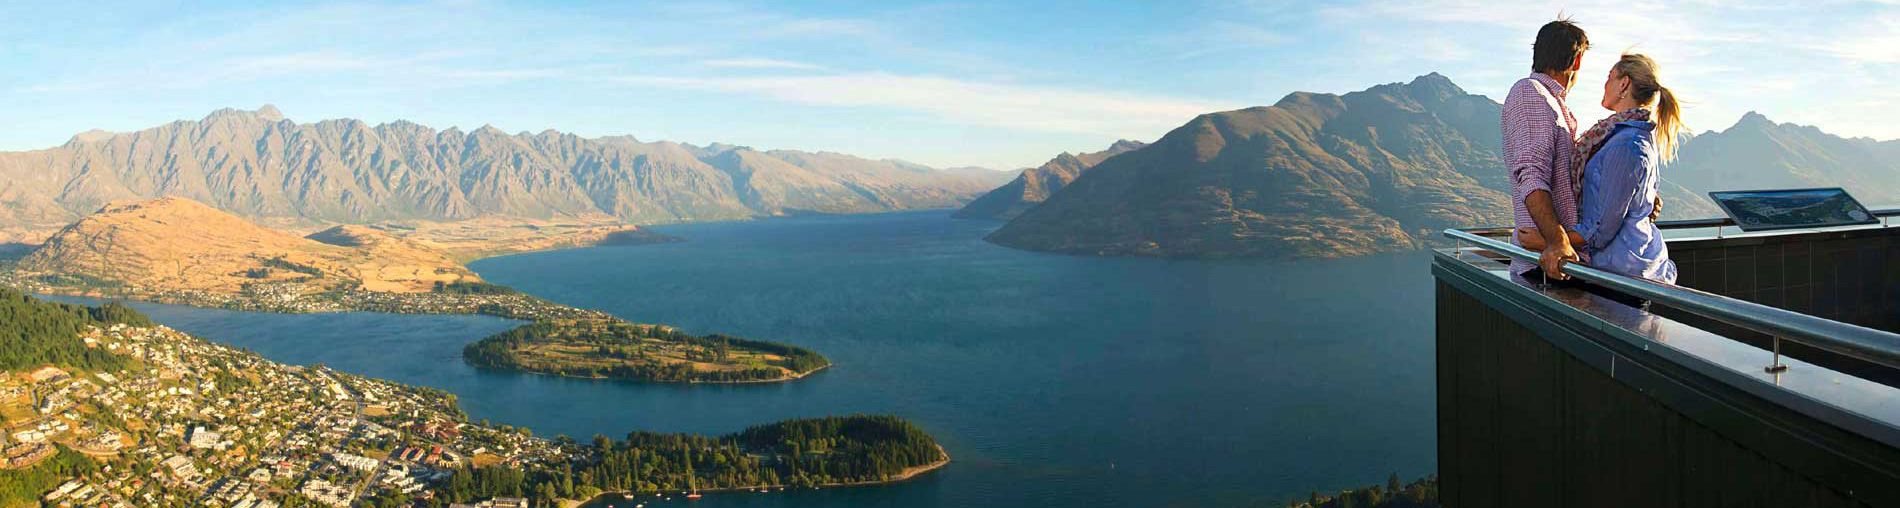 Most Popular New Zealand Tour Packages